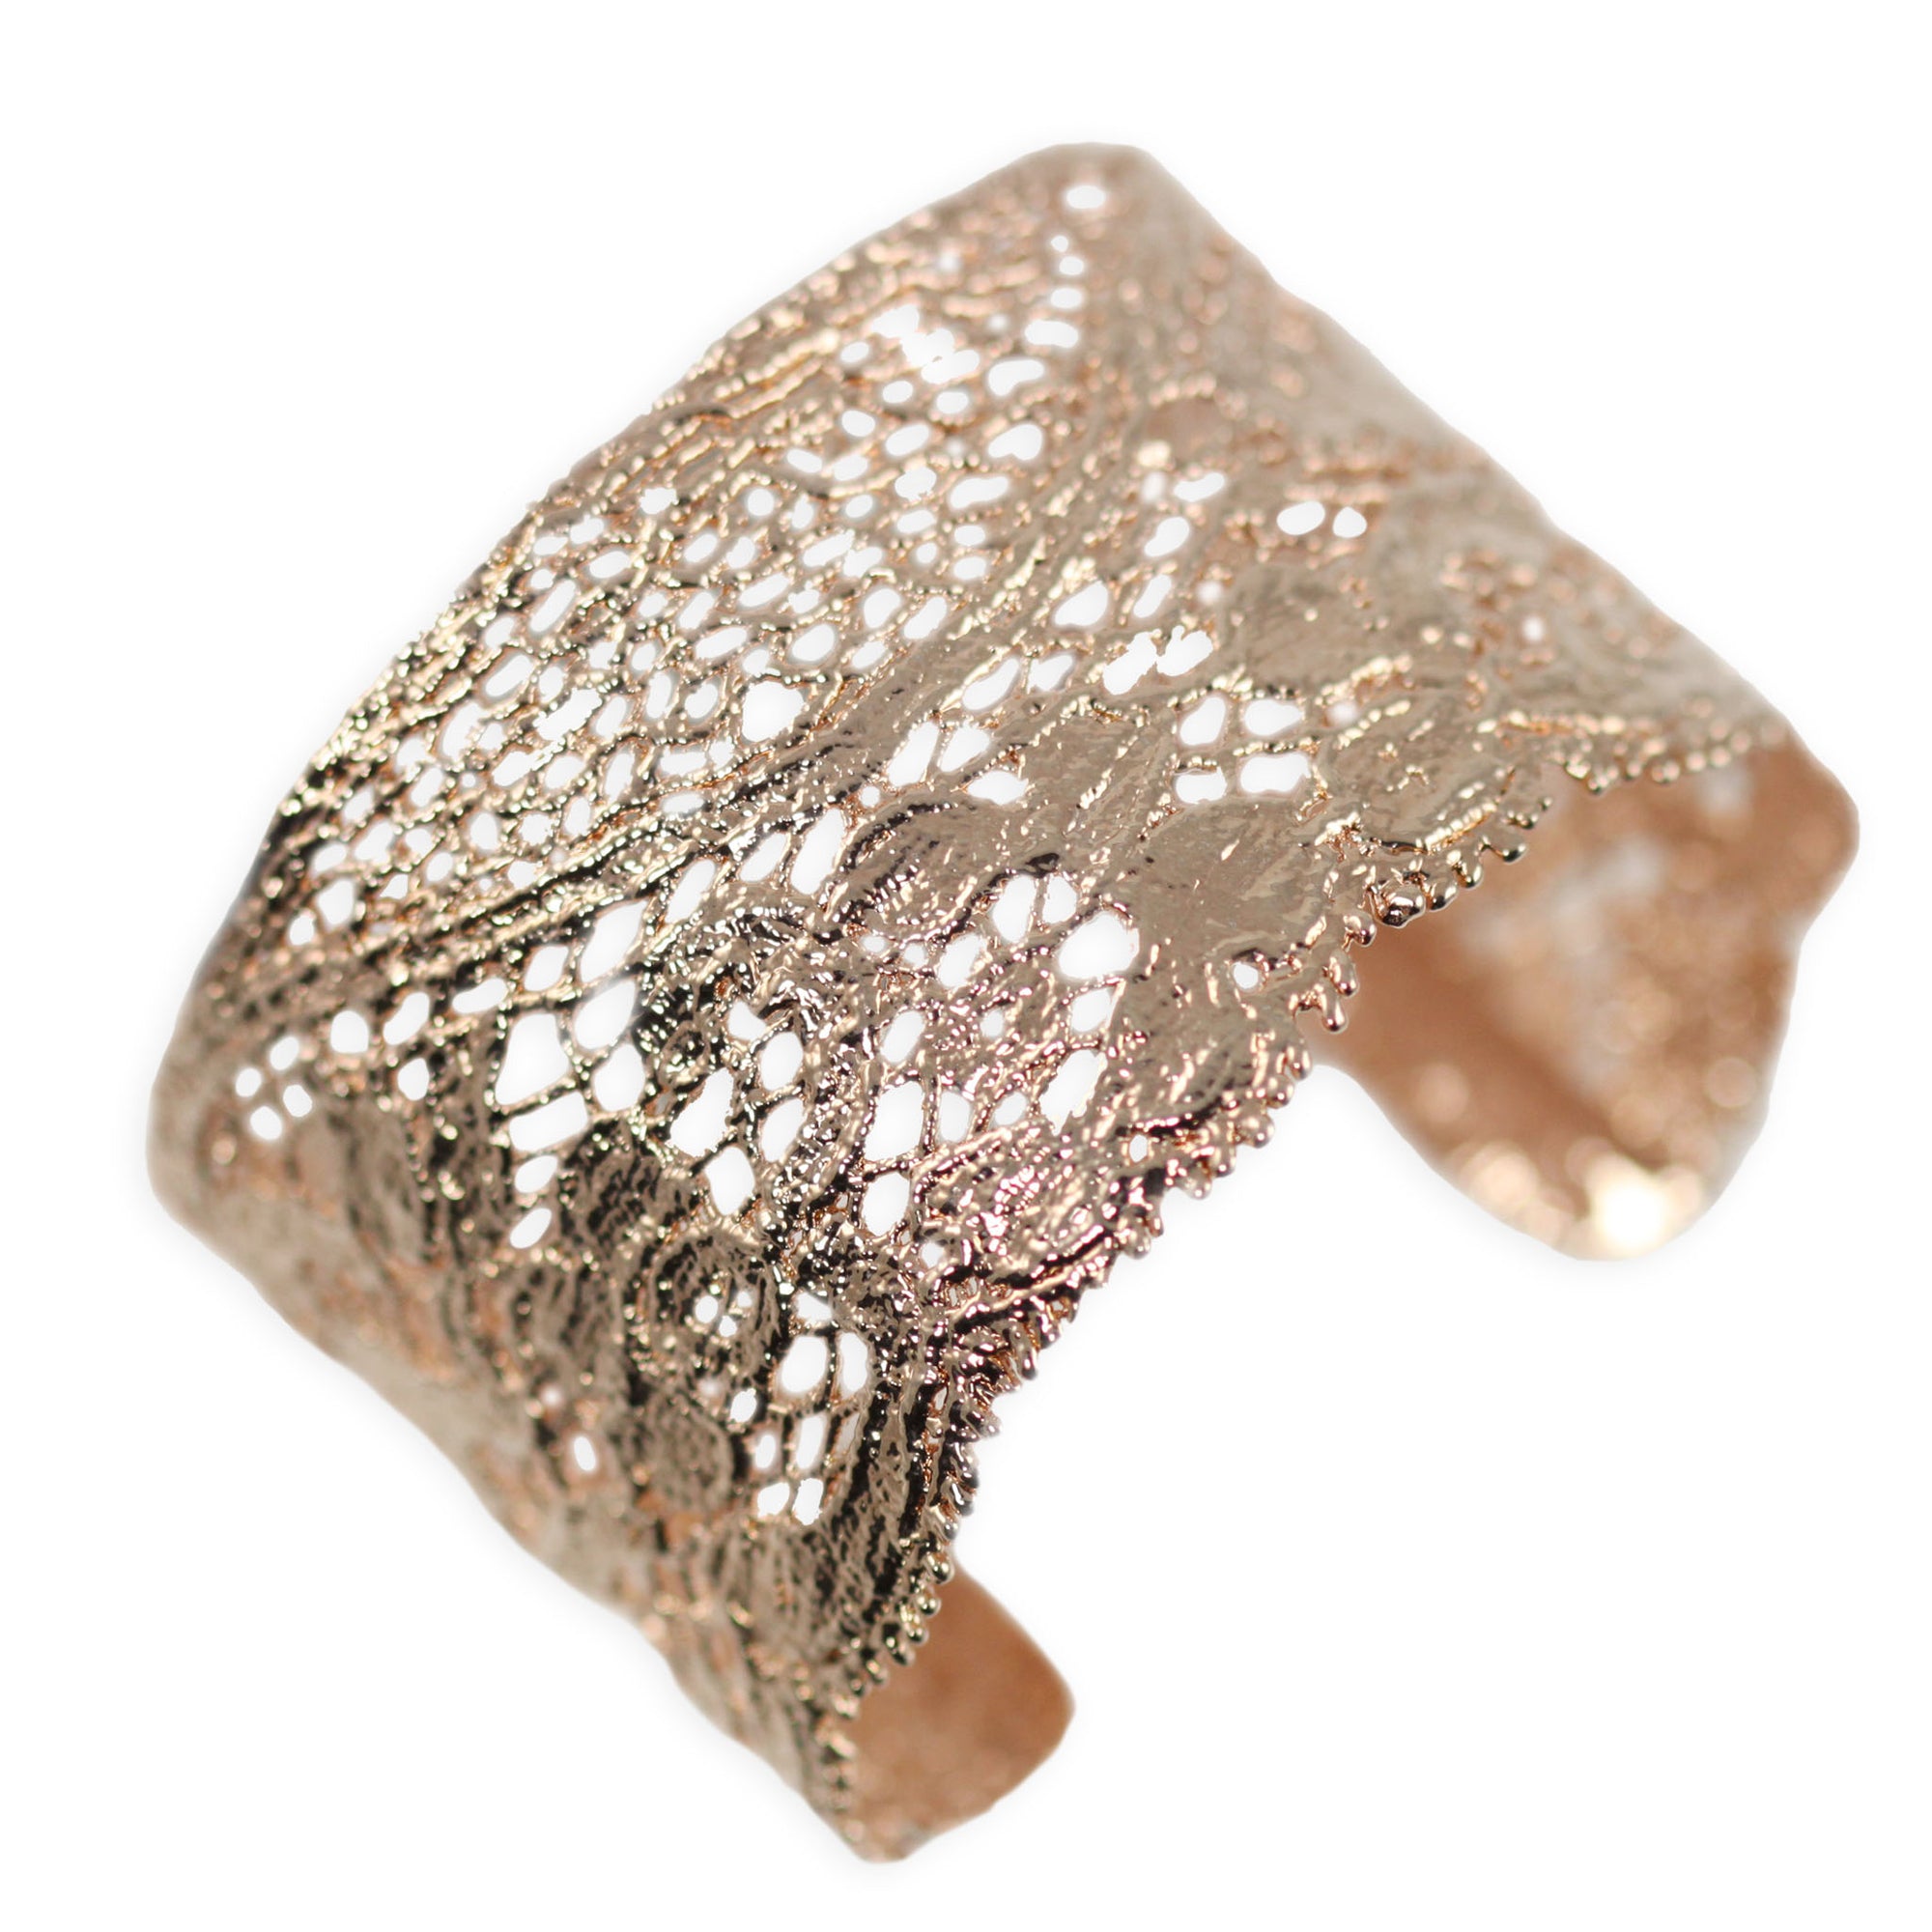 Stunning Cuff bracelet made from antique lace dipped in rose gold.